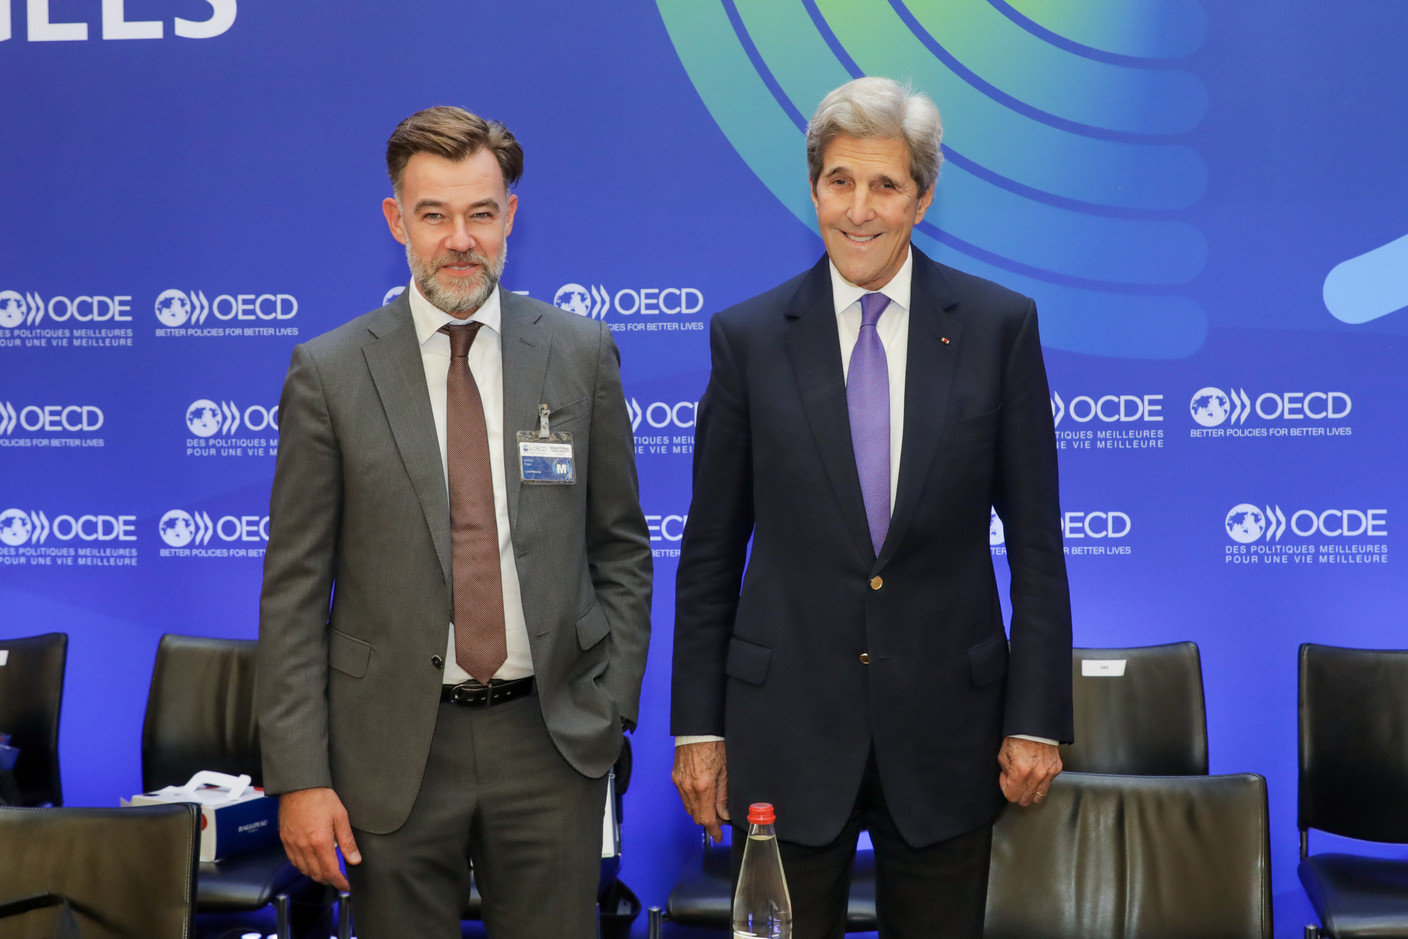 (from l. to r.) Franz Fayot, Minister of the Economy; John Kerry, Special Envoy of the President of the United States of America on Climate Change (chairing the Council meeting at ministerial level) SIP/LUC DEFLORENNE